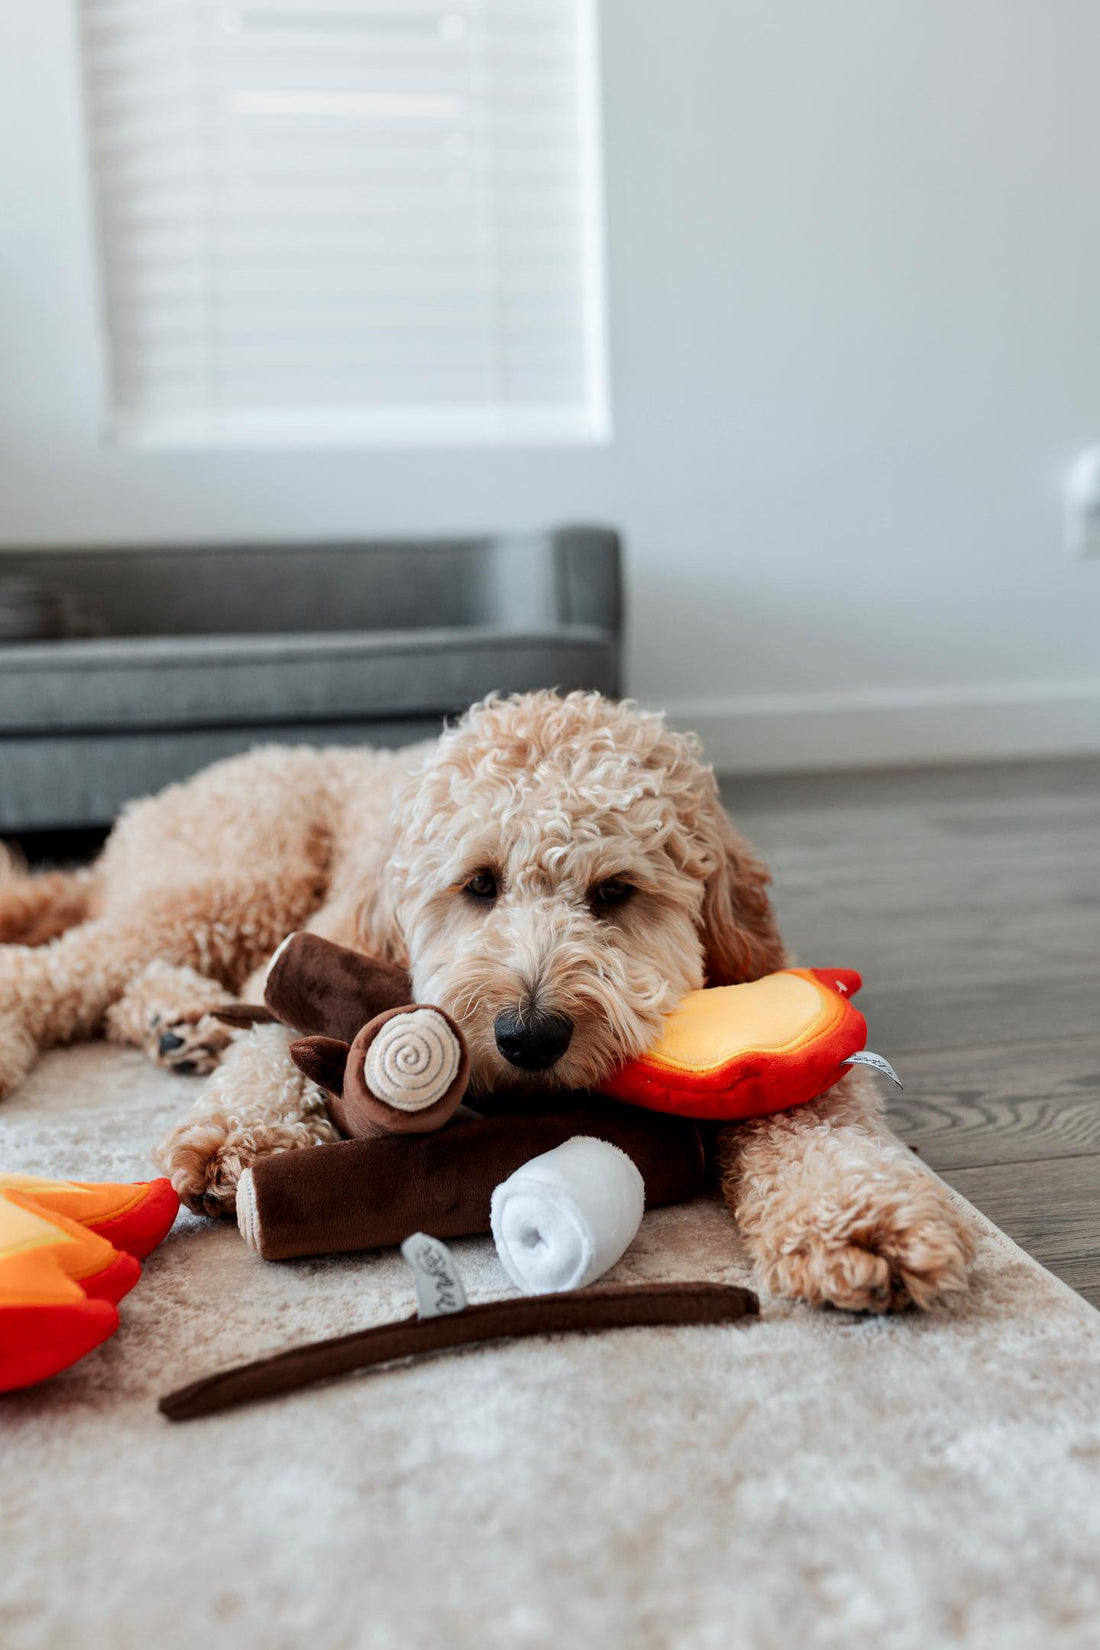 5 Easy Ways to Spoil Your Dog